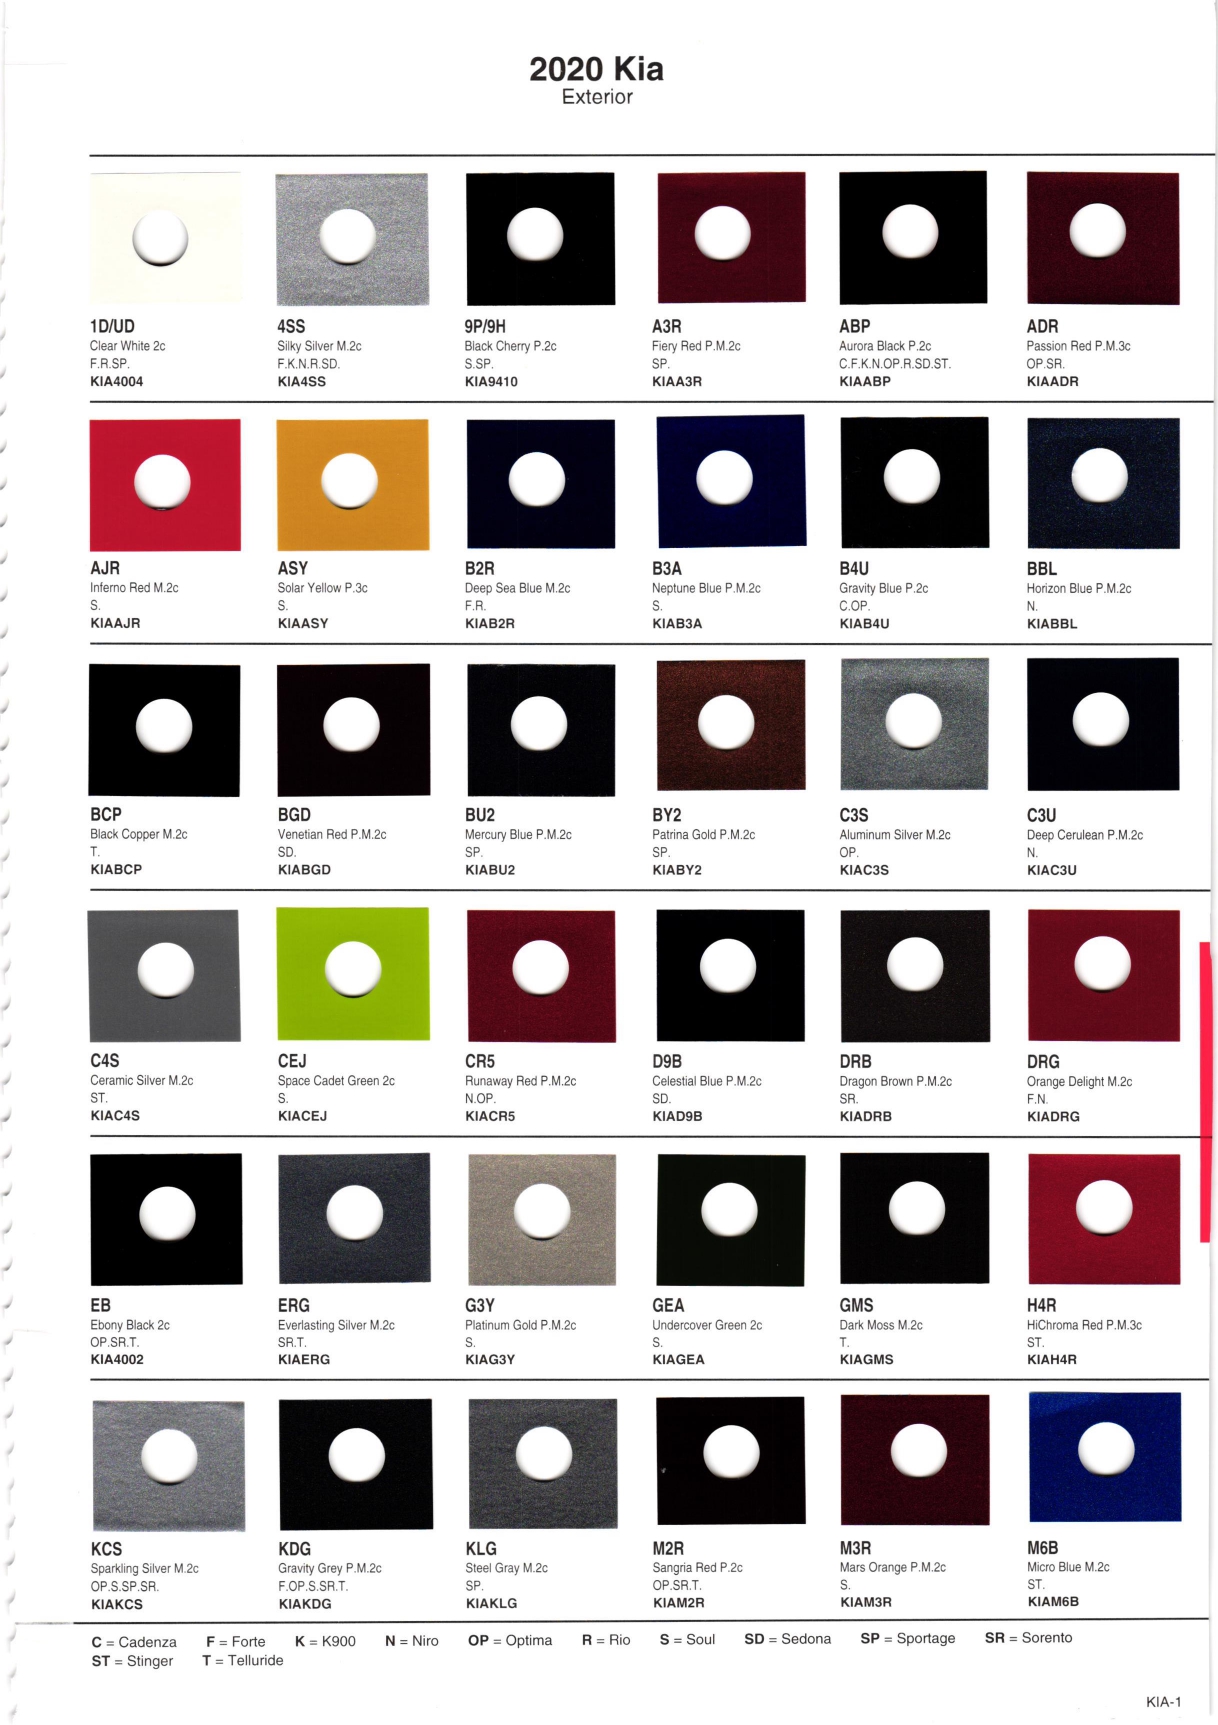 Paint Swatches for Kia in 2020